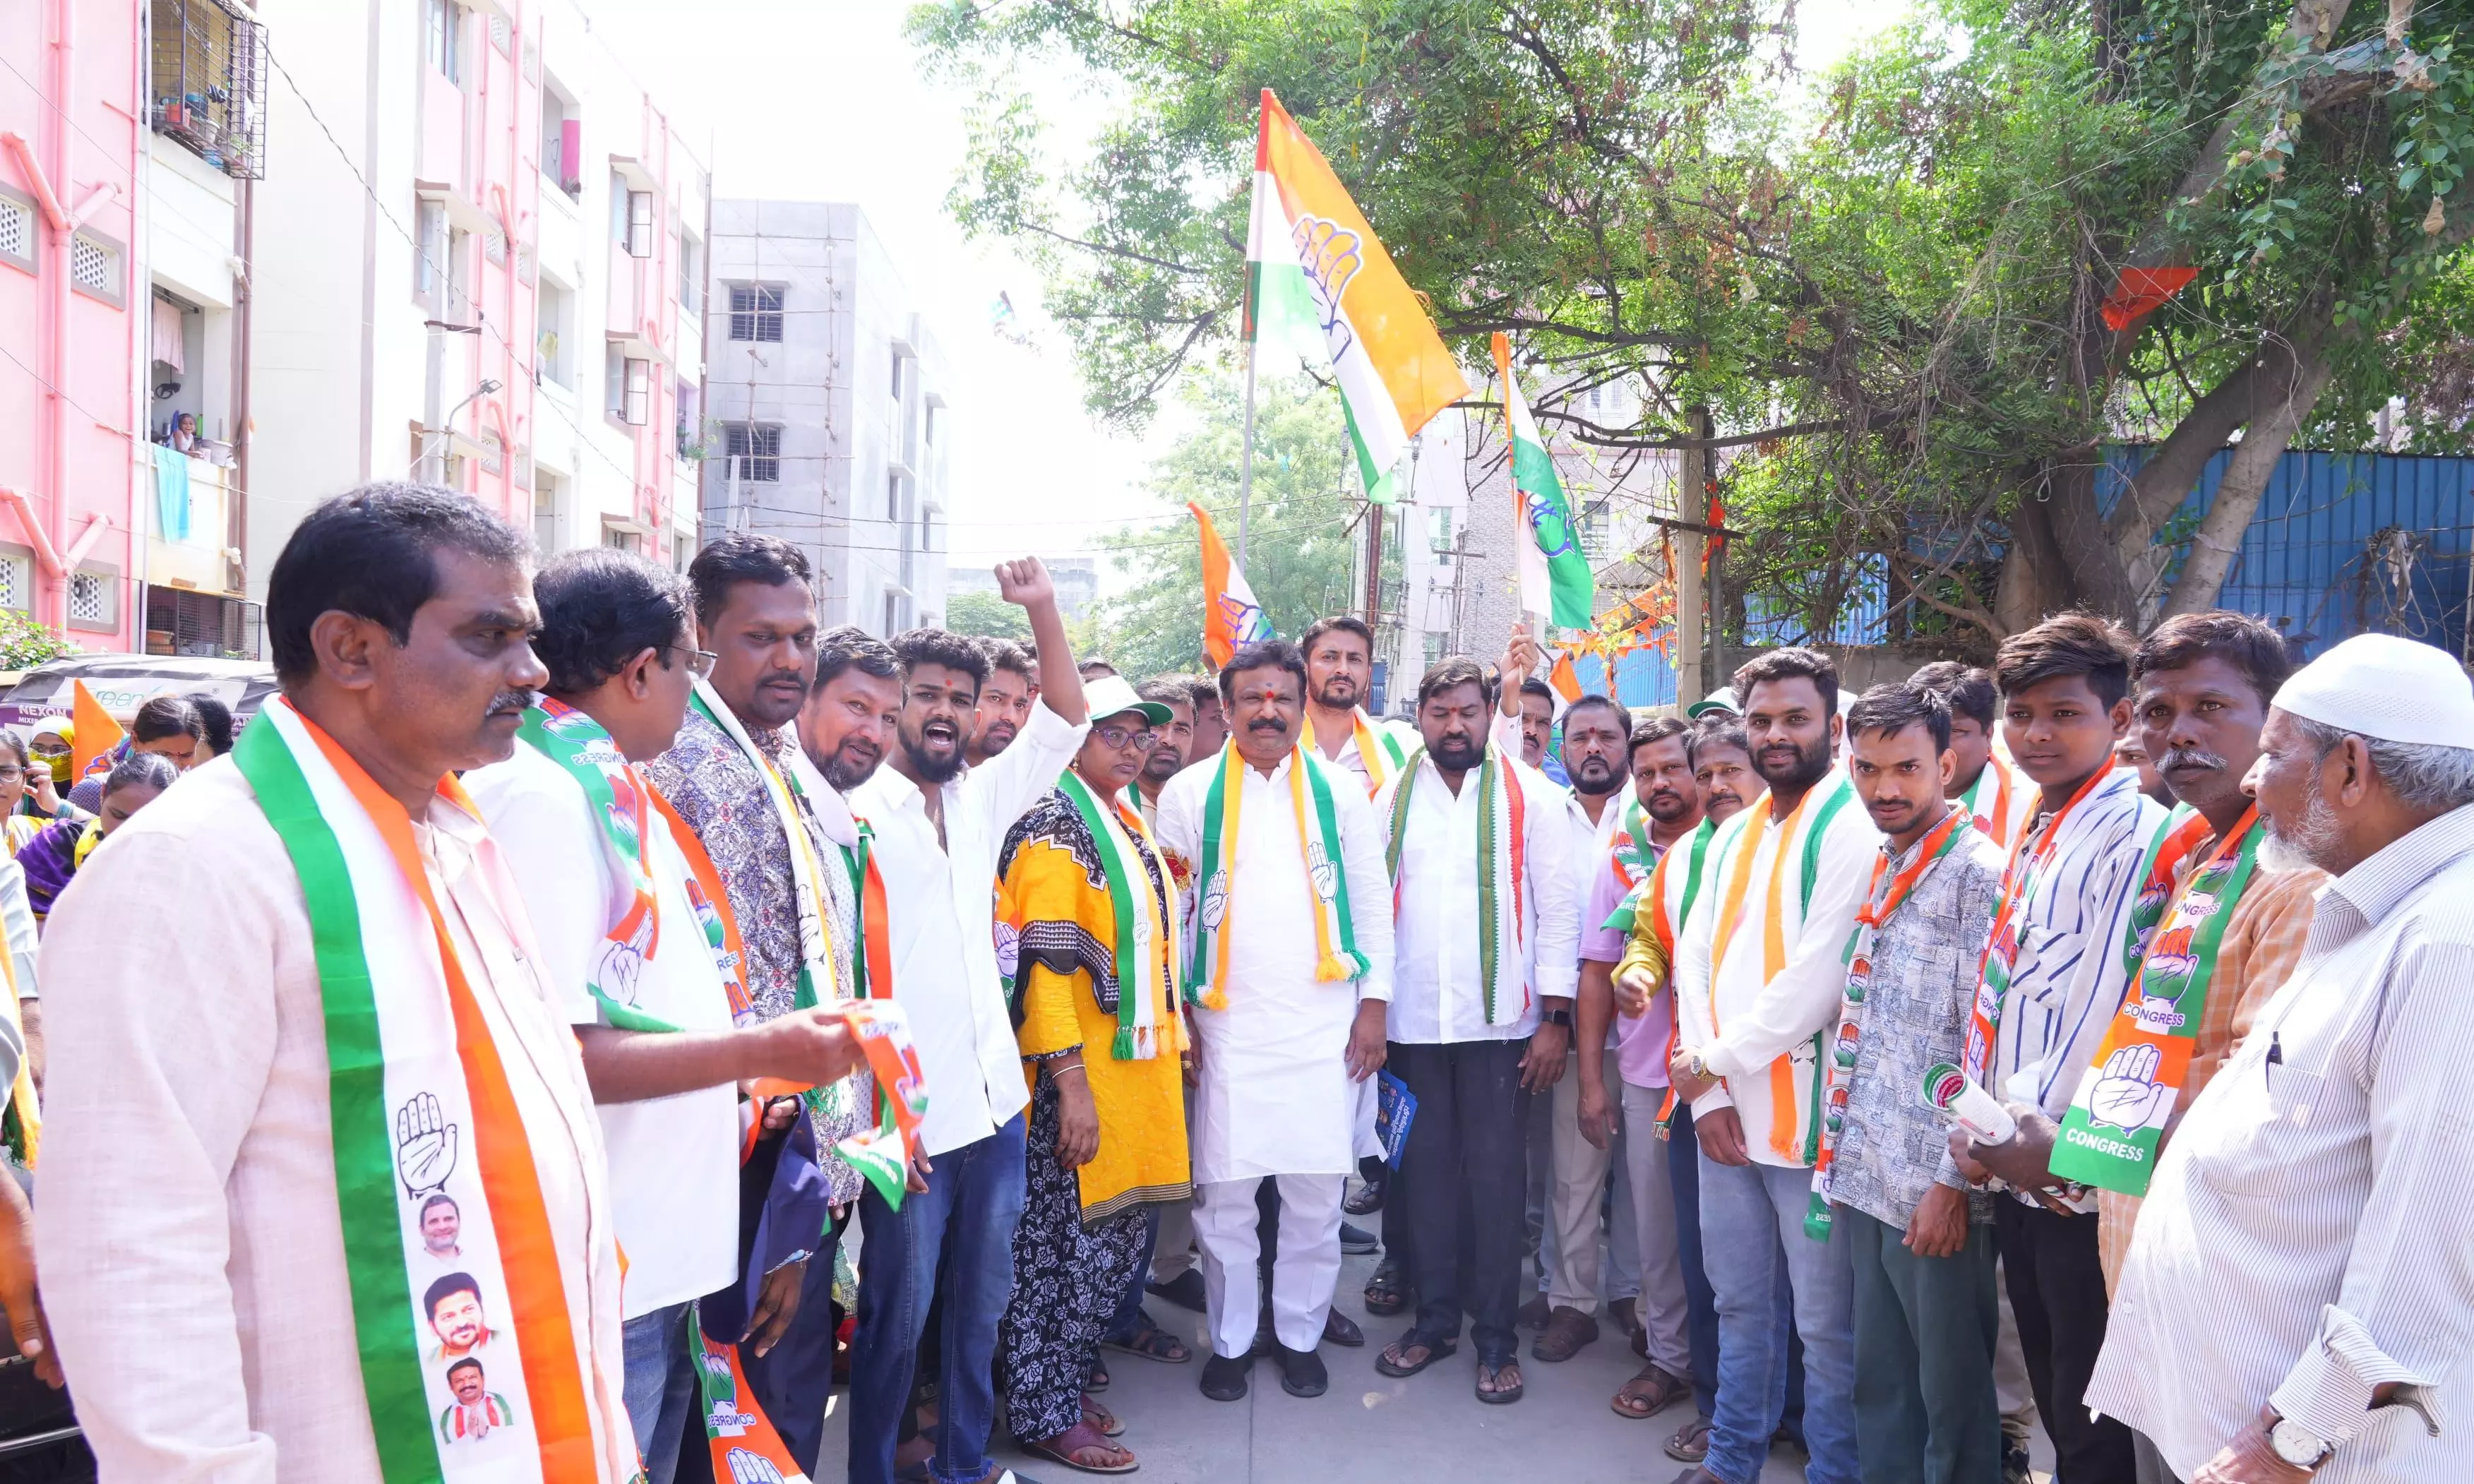 Vote Congress on May 13 for More State Services, Urges Ganesh